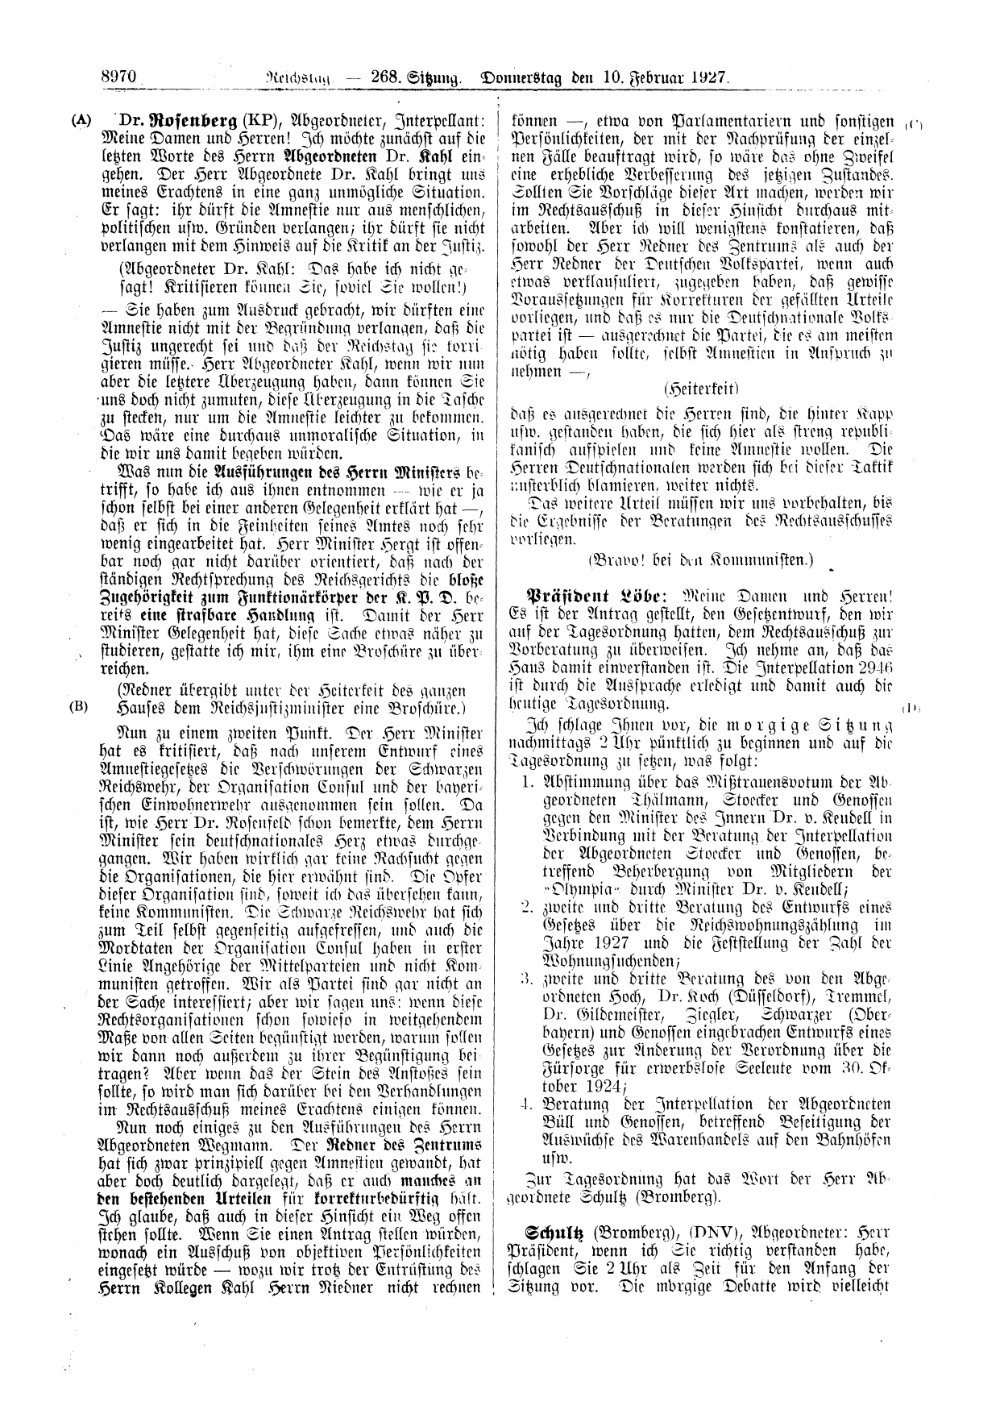 Scan of page 8970